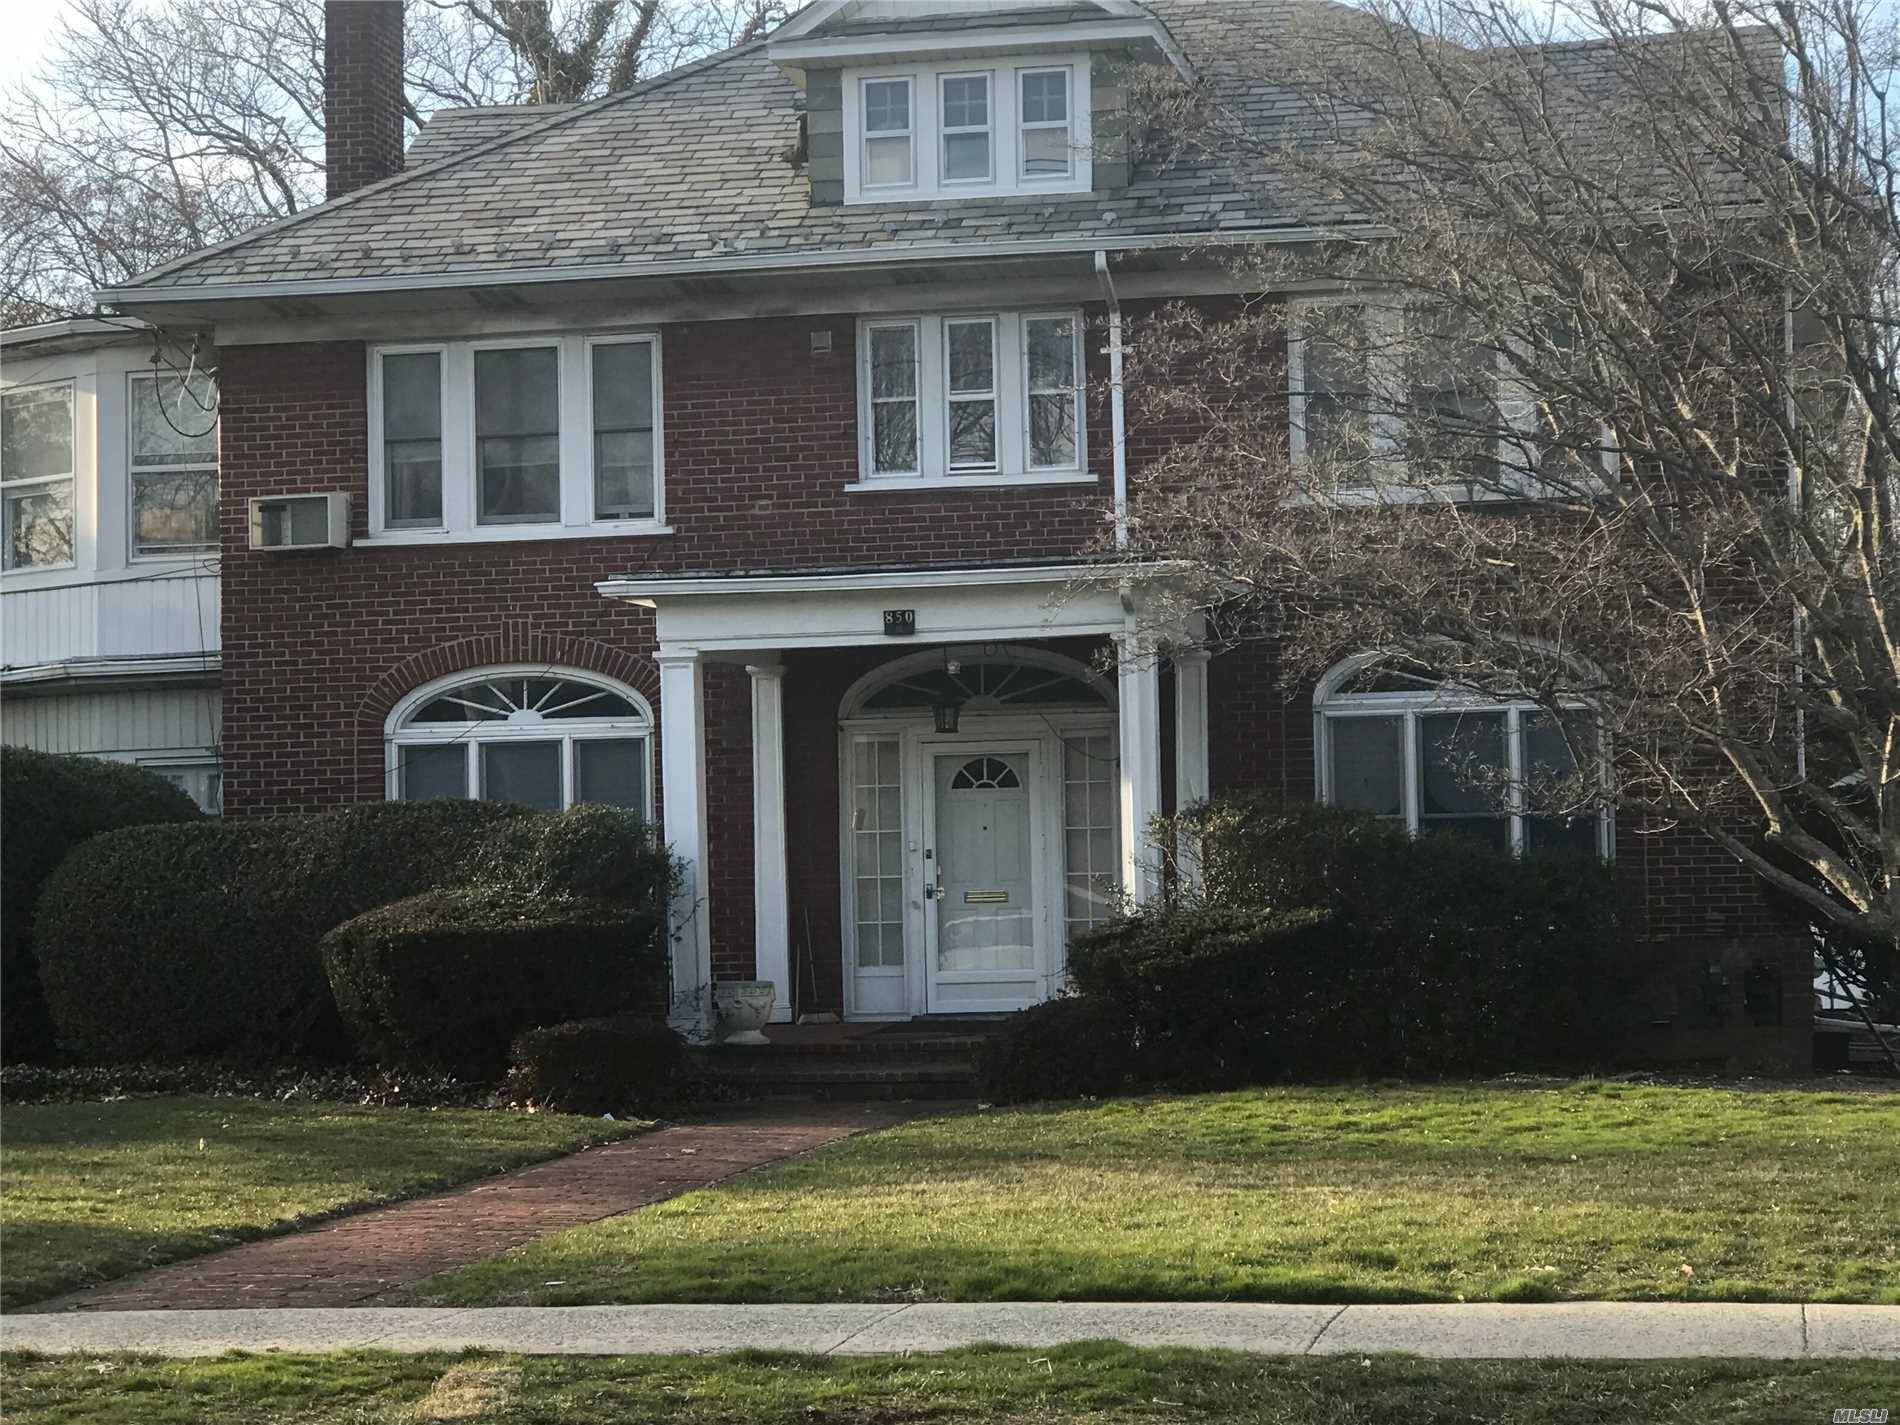 Grand  Brick Ch Colonial With High Ceilings Throughout,Large Formal Dining Room, Eik Den, Enclosed Porch Plus Bedroom And Full Bath.